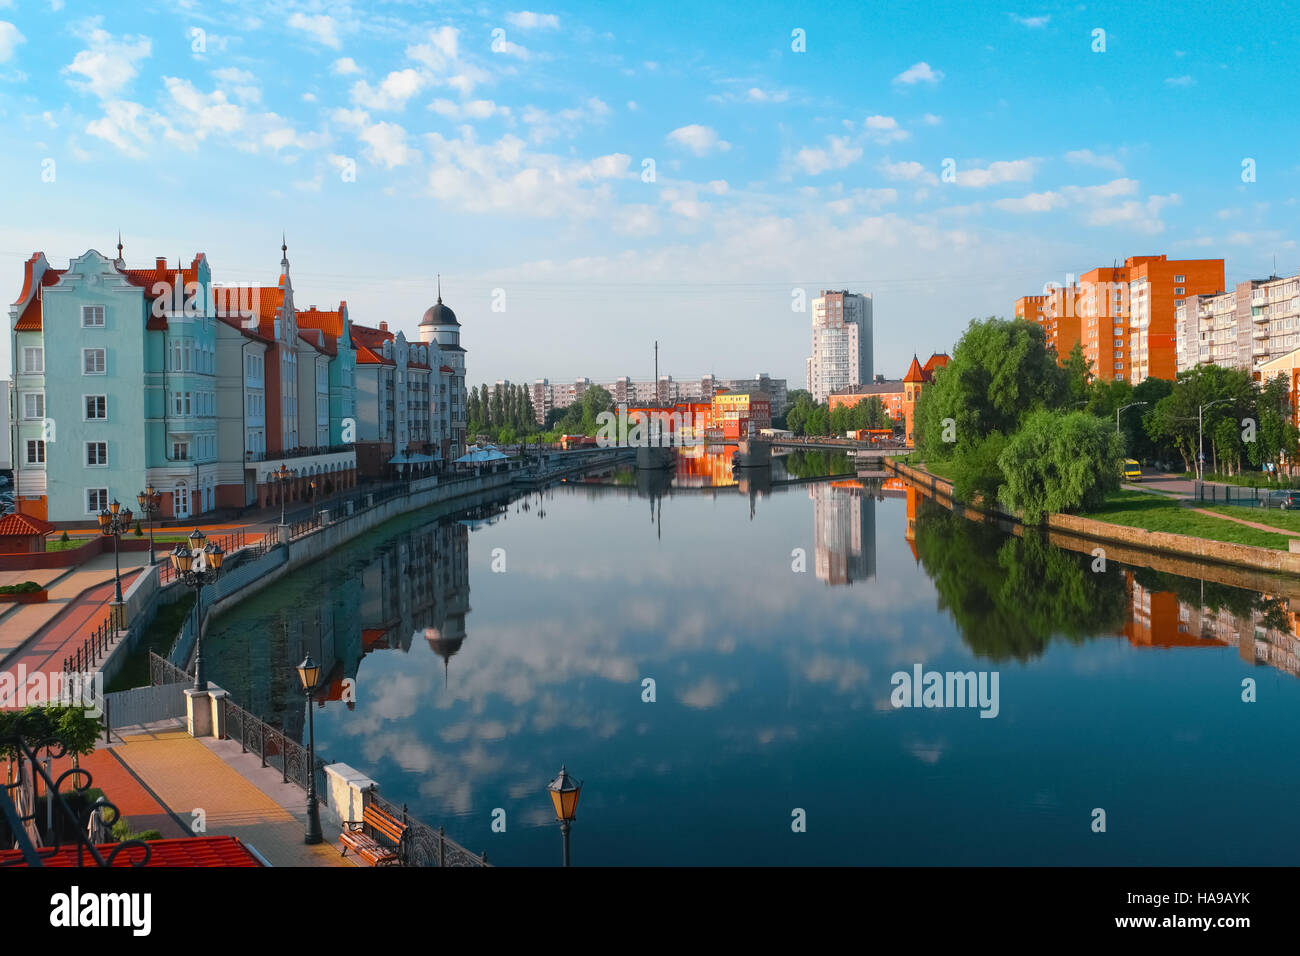 Beautiful view of the center of Kaliningrad city and Pregolya River, Russia, Europe Stock Photo